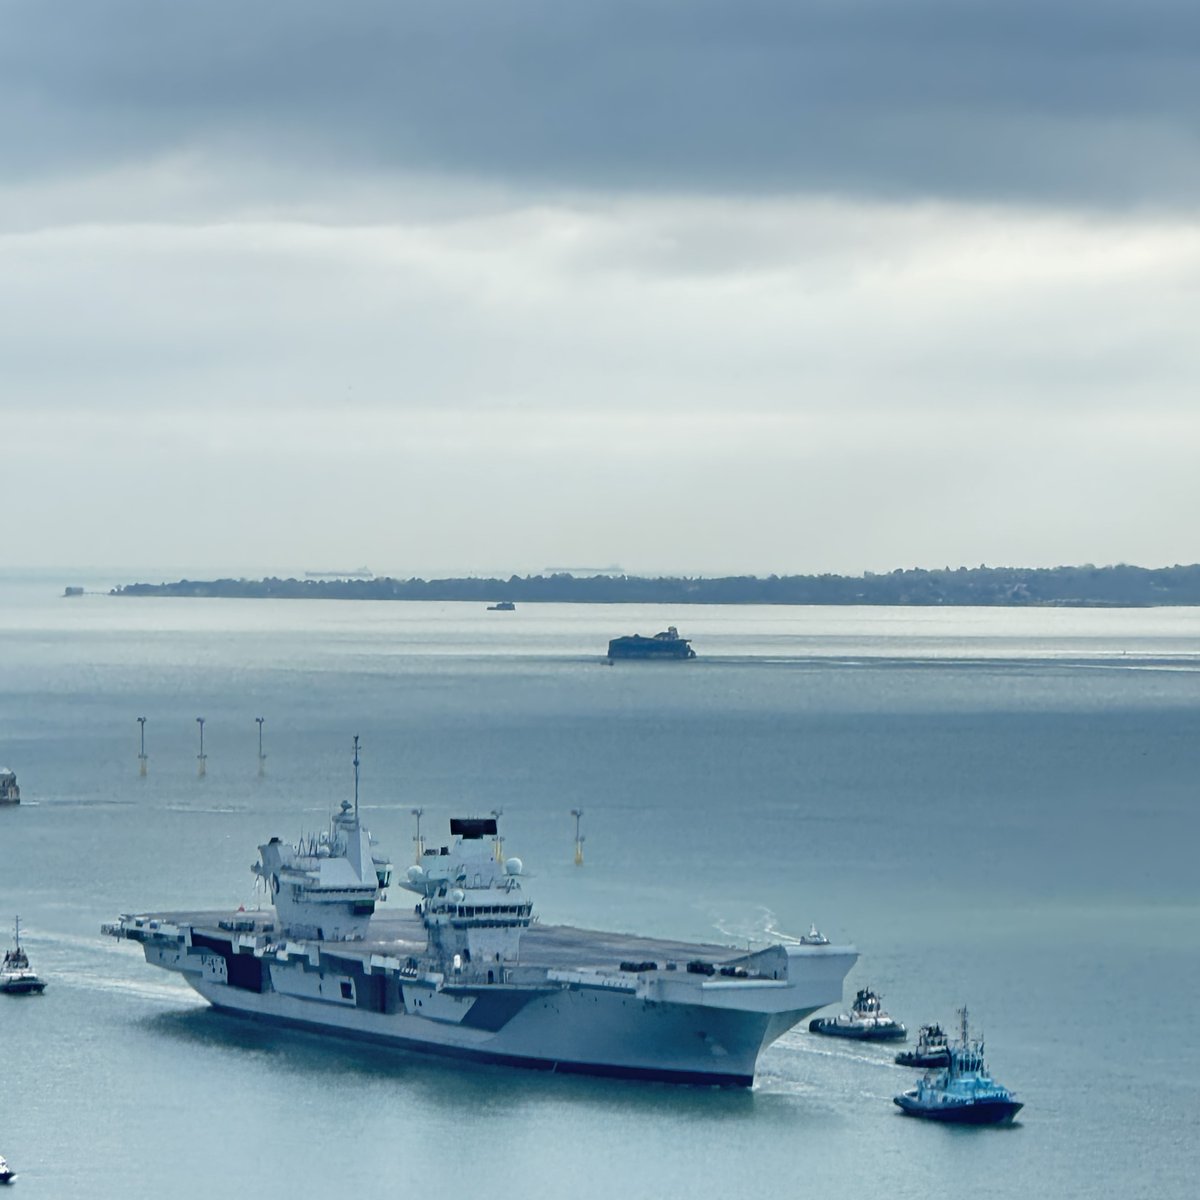 Welcome back HMS Queen Elizabeth. There’s no better viewpoint to see her returning than 100m above the harbour.